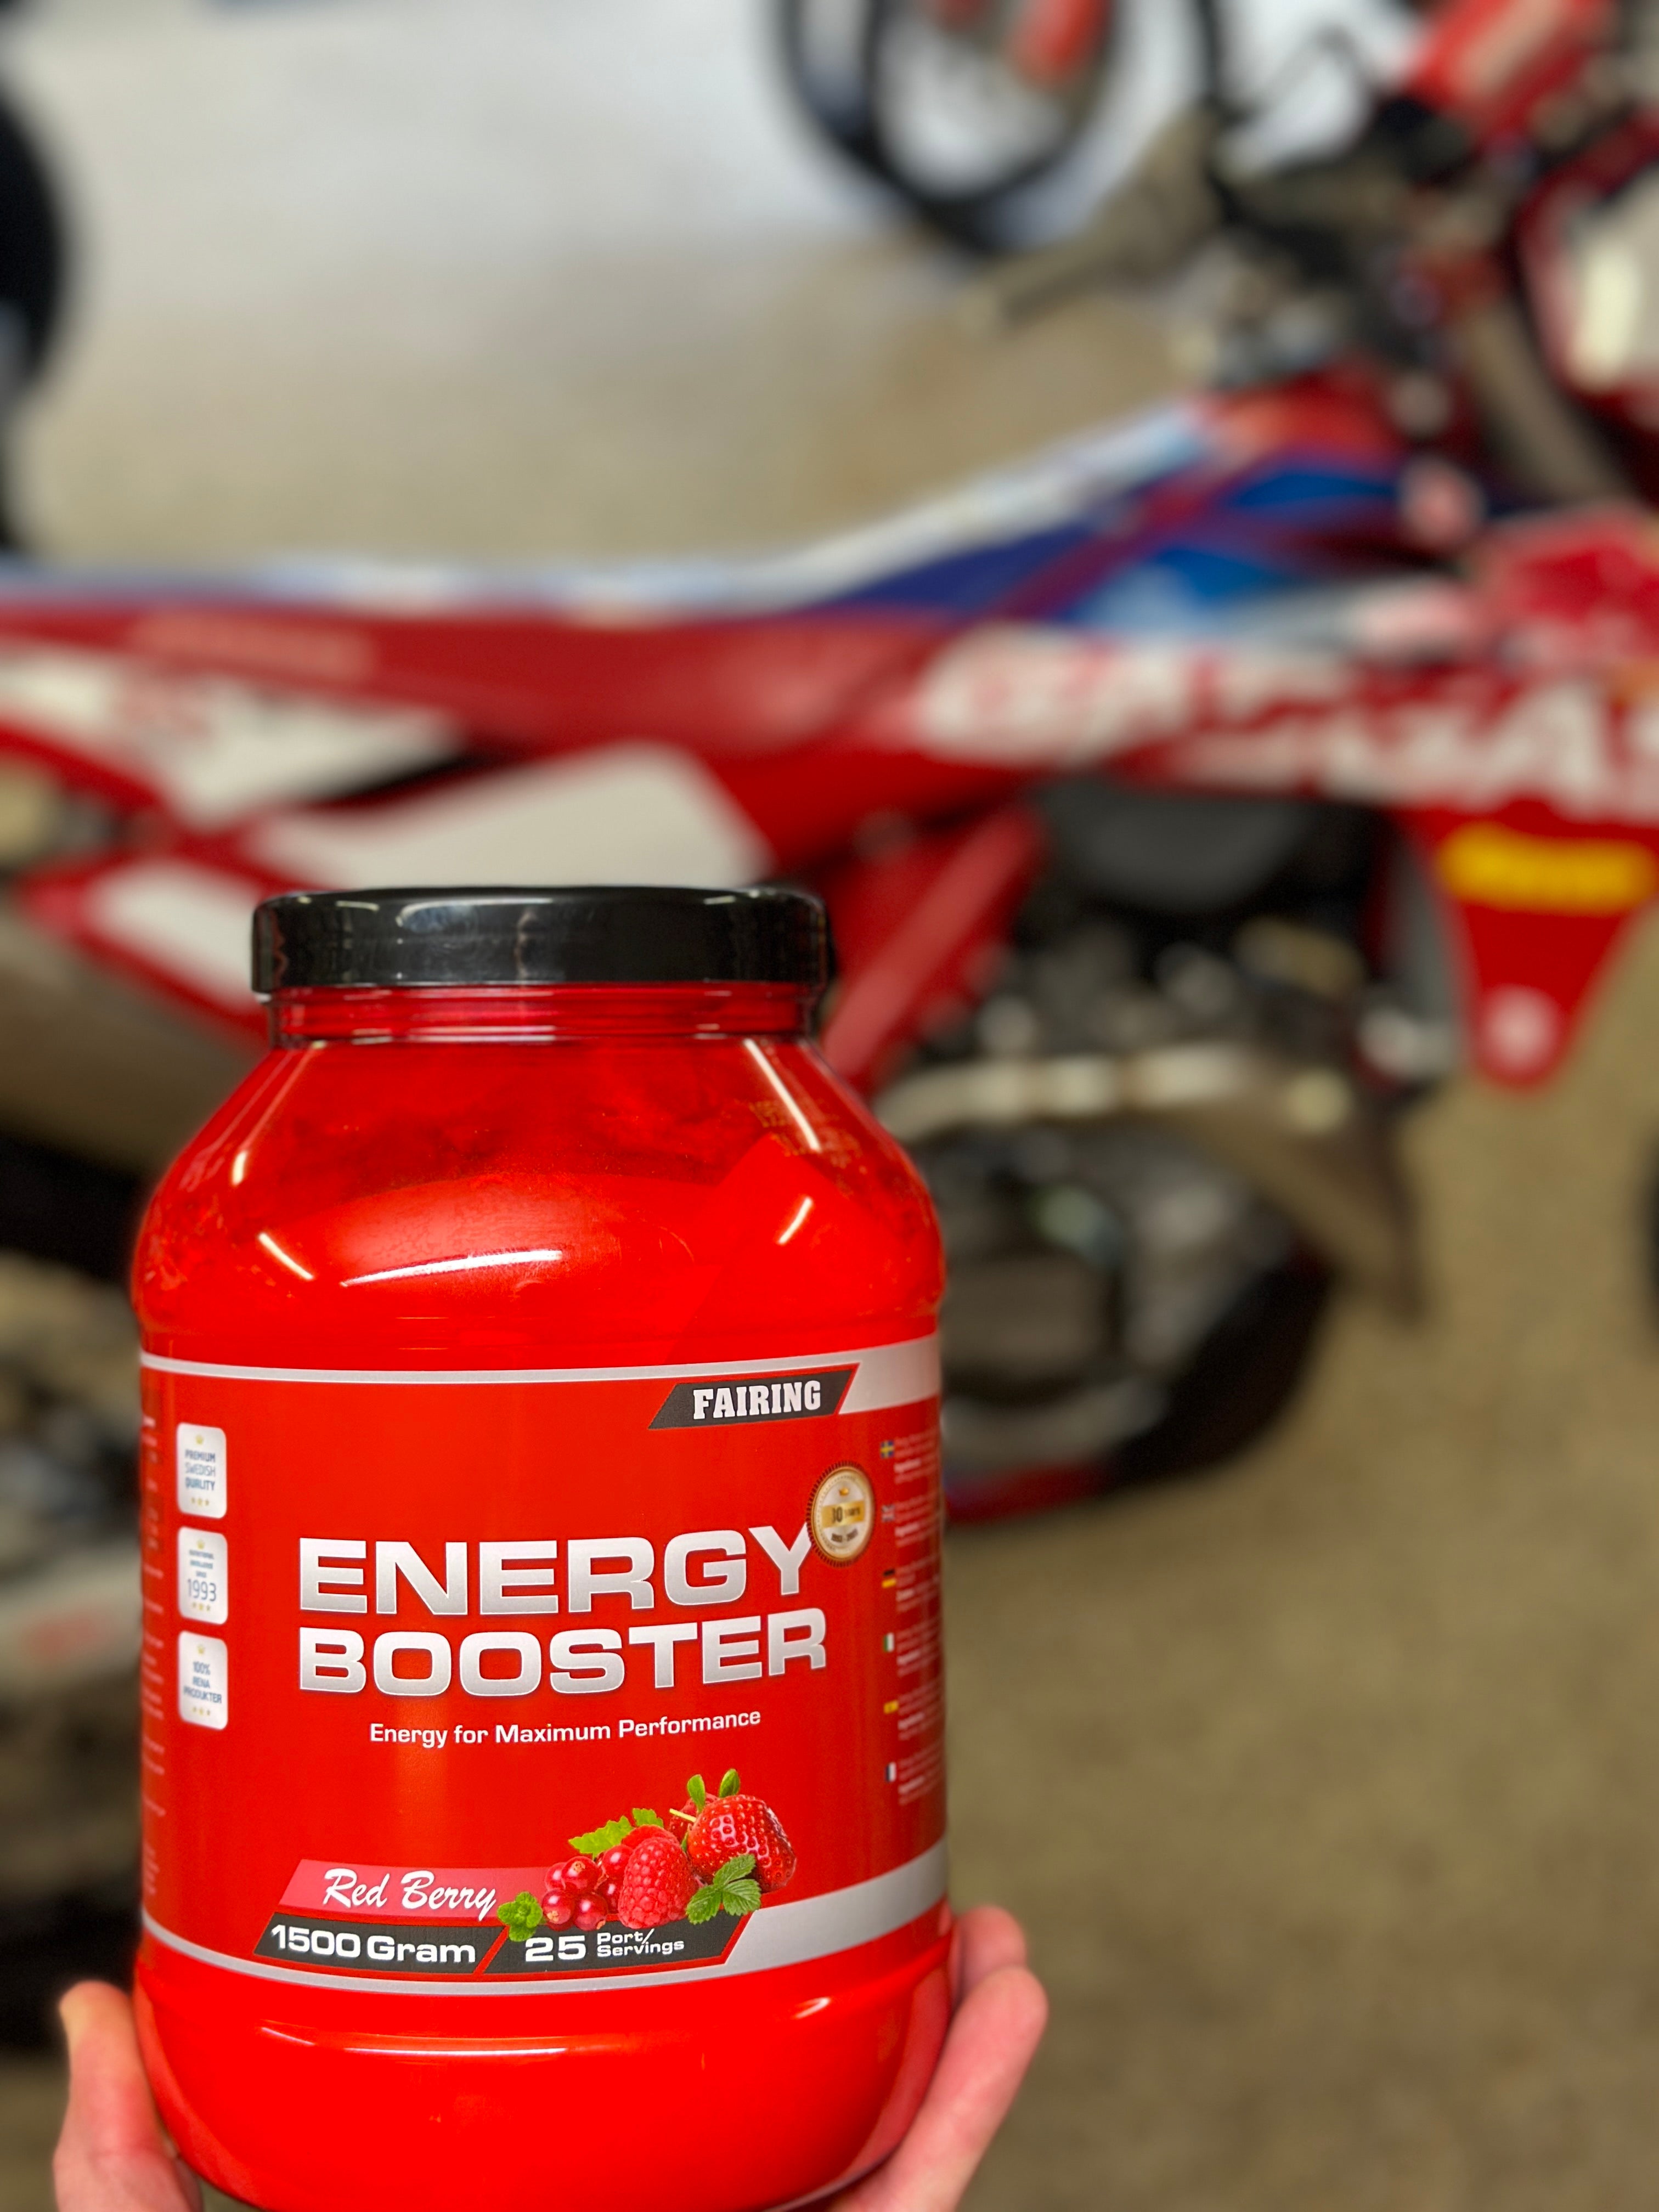 Fairing ENERGY BOOSTER red berry